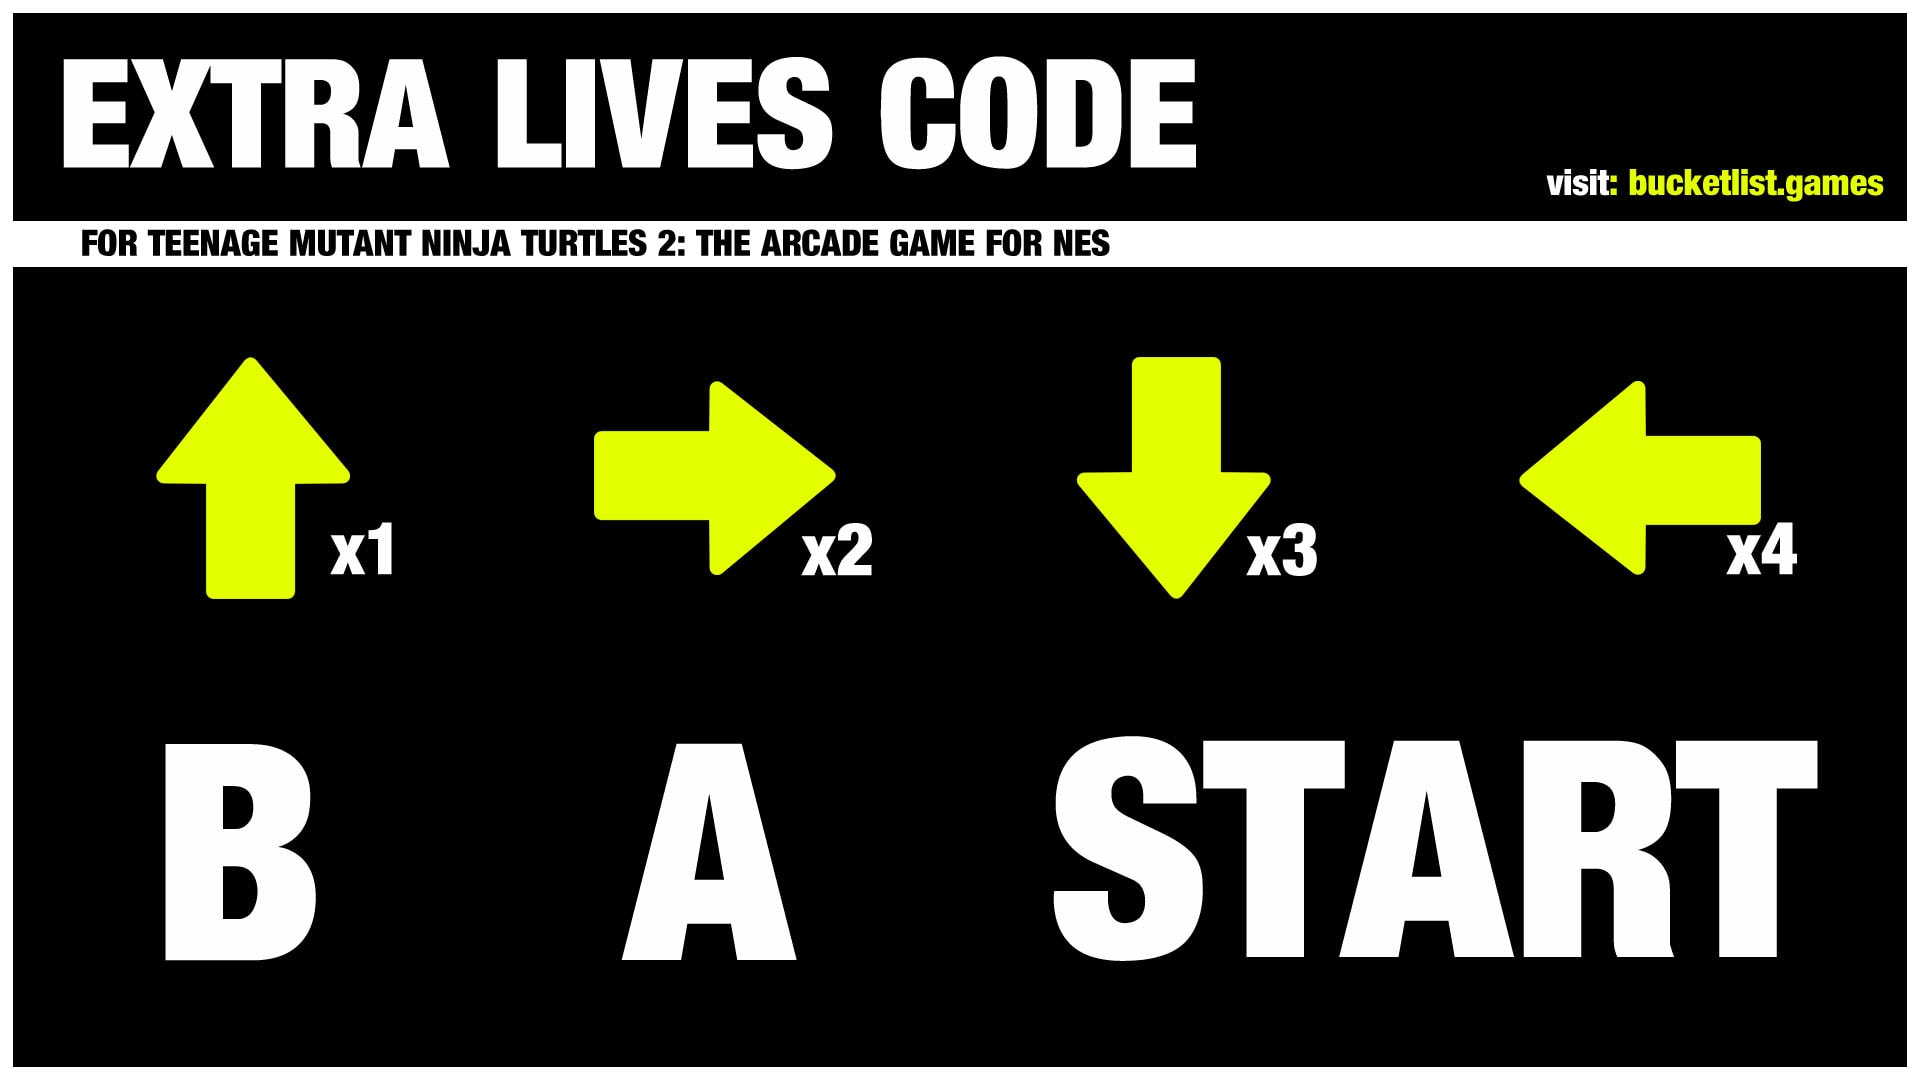 Extra lives code text on black background